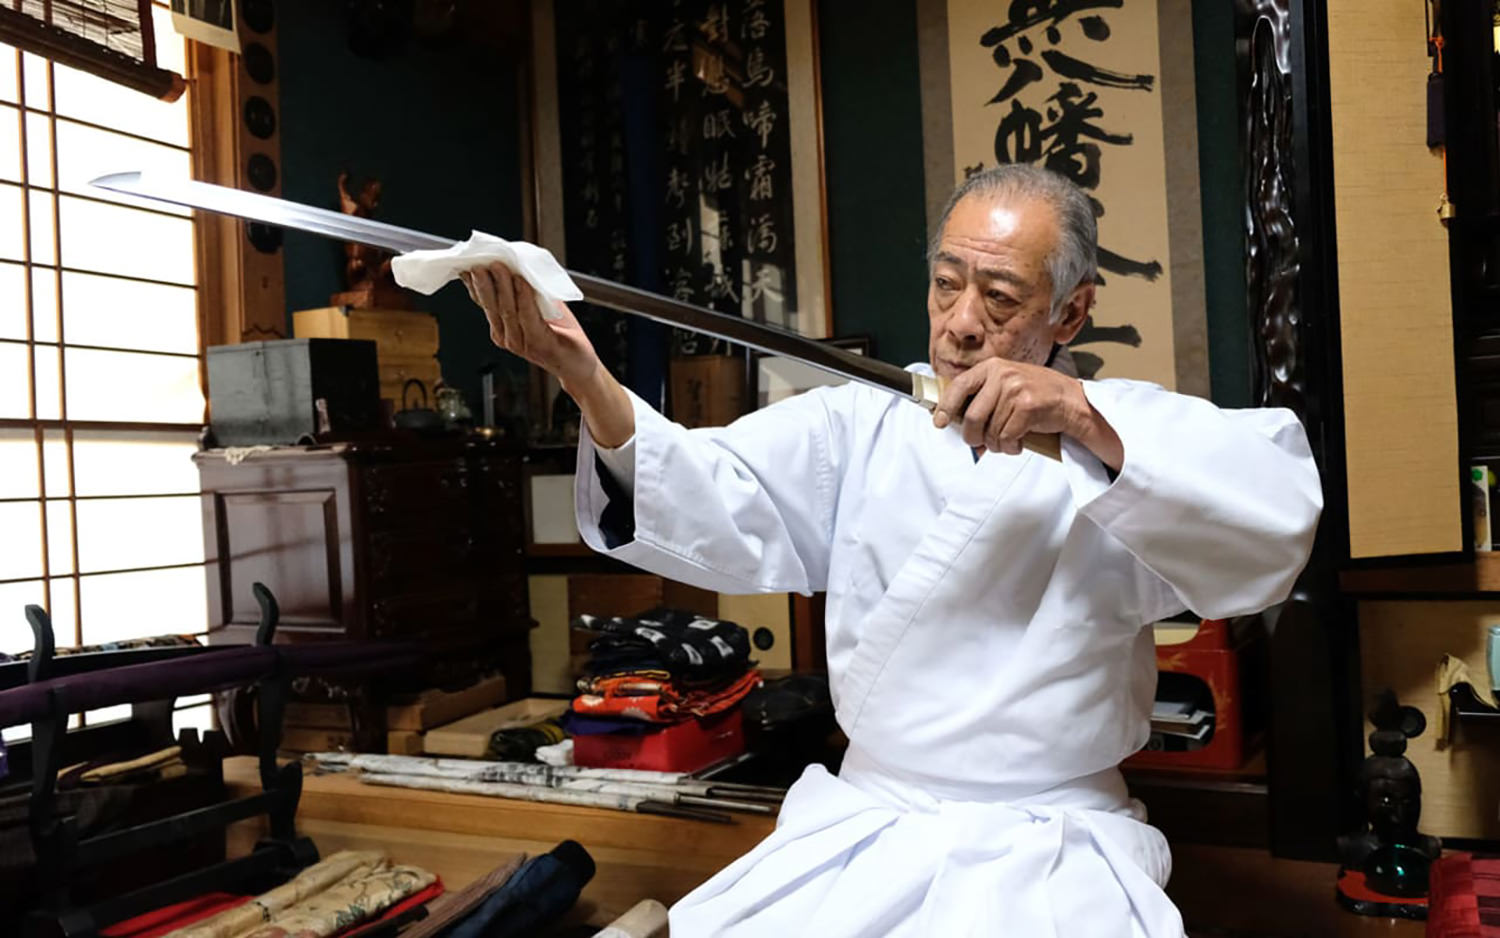 A Rare Glimpse into the World of Katana Sword-Making with